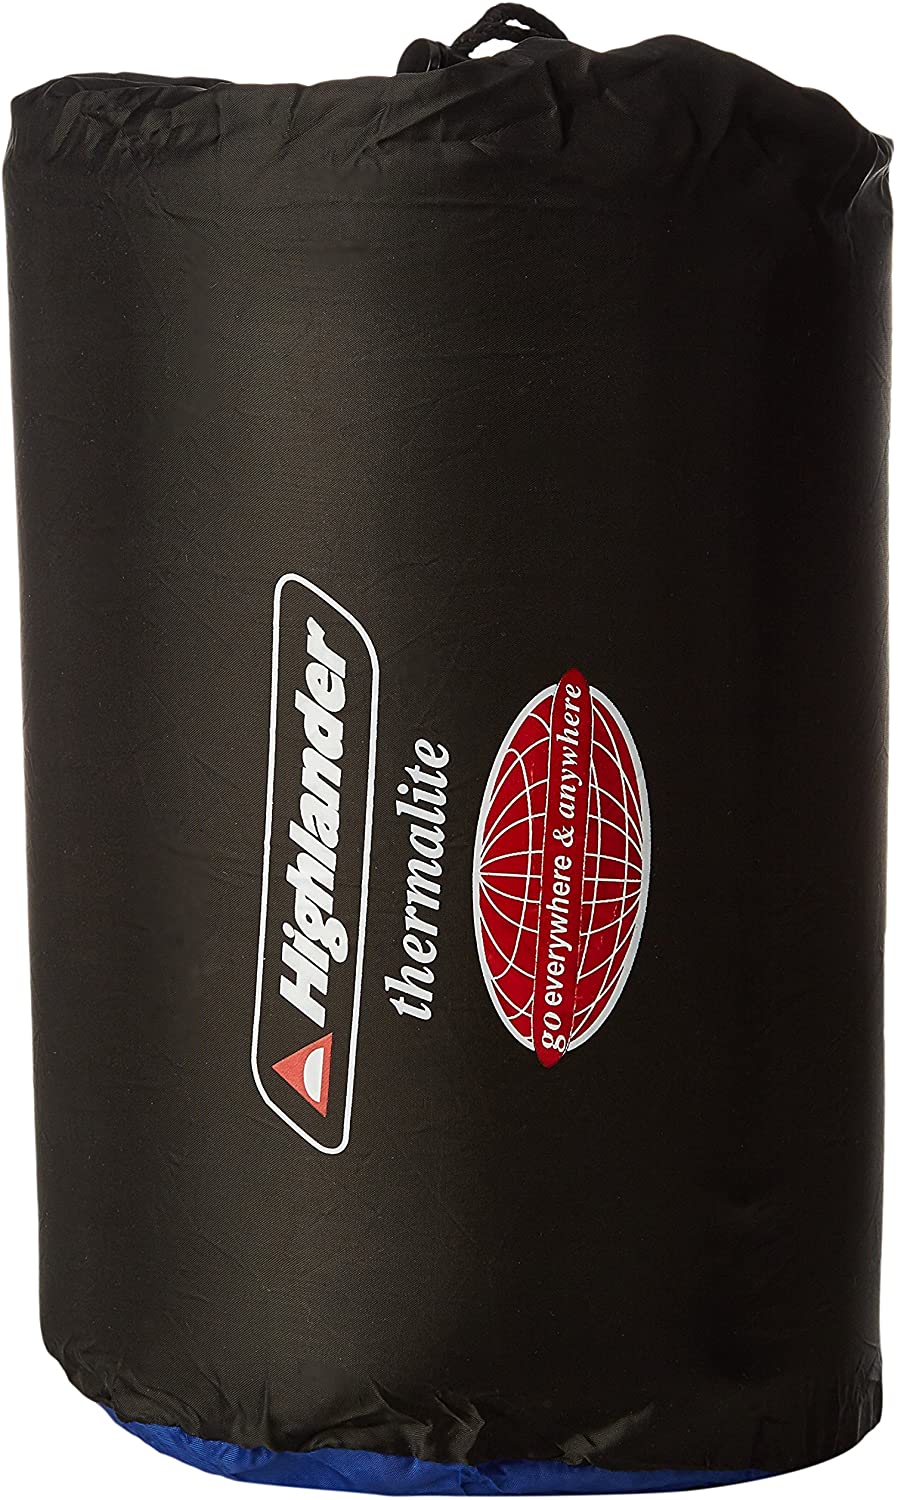 Thermalite Full Size Self Inflating Mat